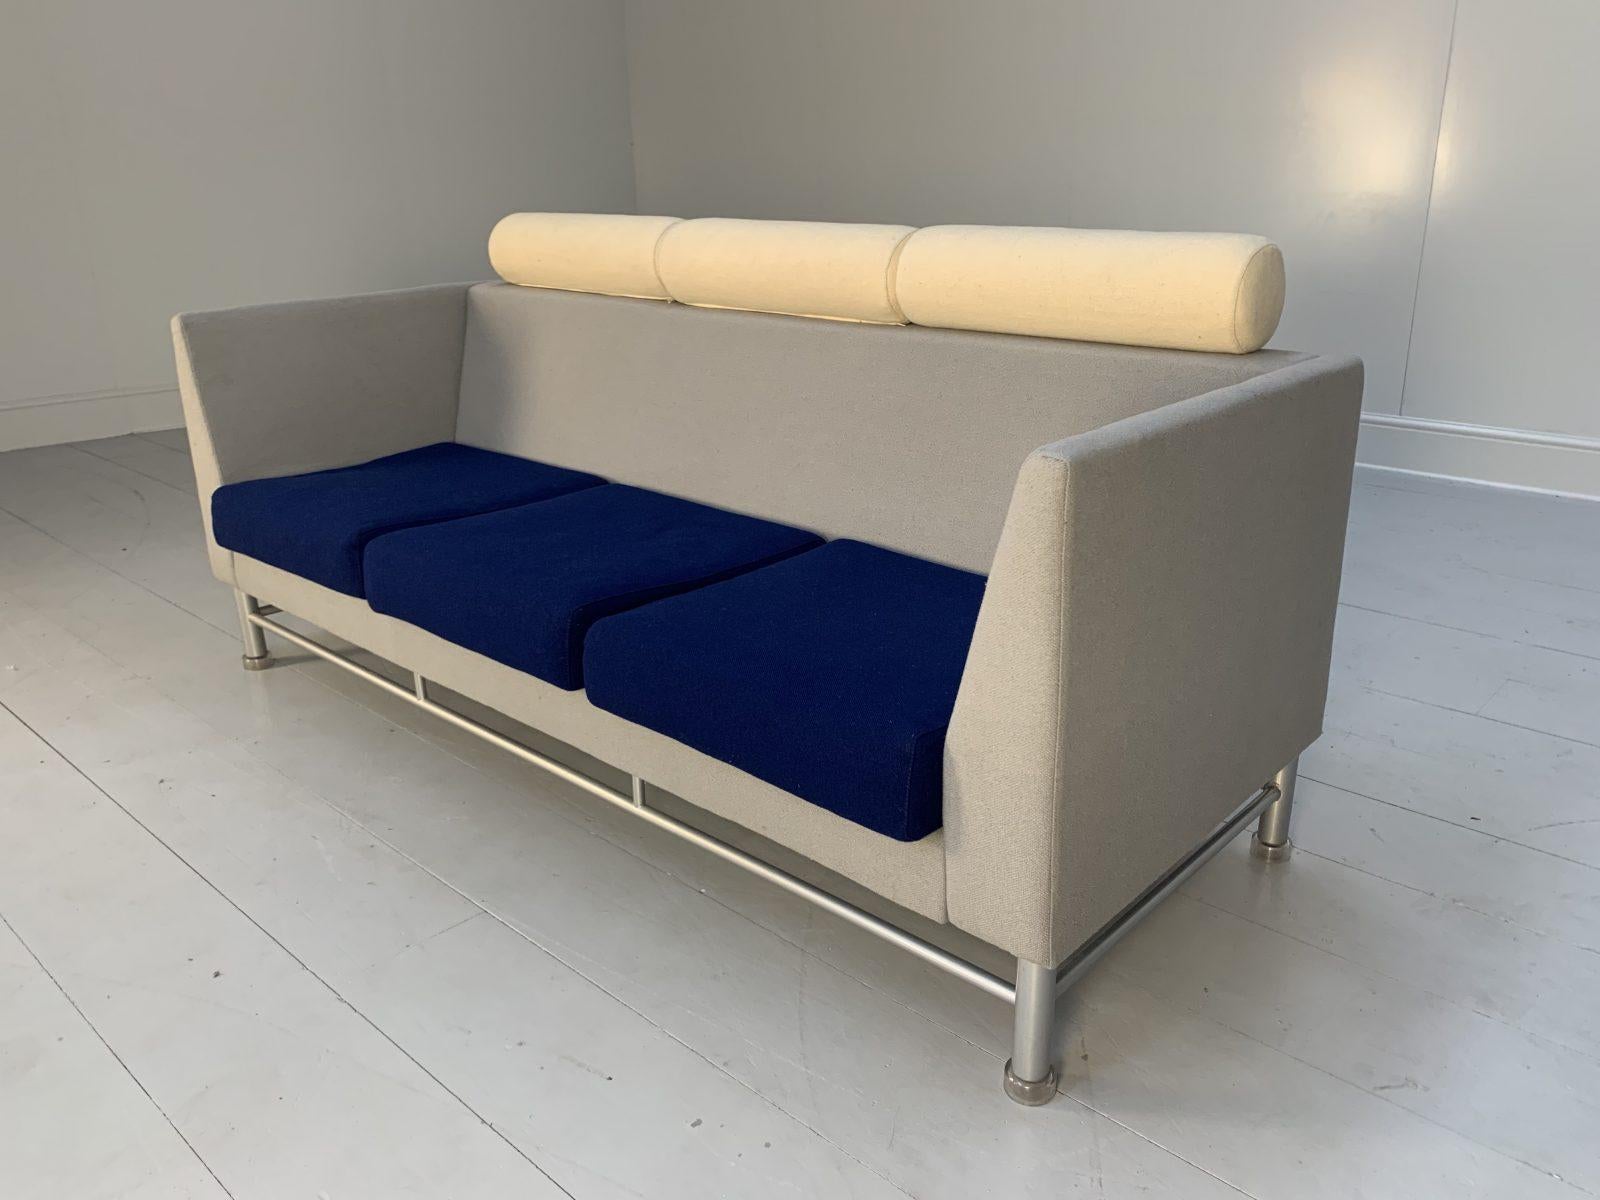 This is quite a find and a genuine 1980’s icon, it being a rare, original “East Side” Sofa from the world renown furniture house of Knoll International, dressed in their sublime Woven Woollen-Felt fabric in Mid-Blue and Grey, and with Silver-Painted